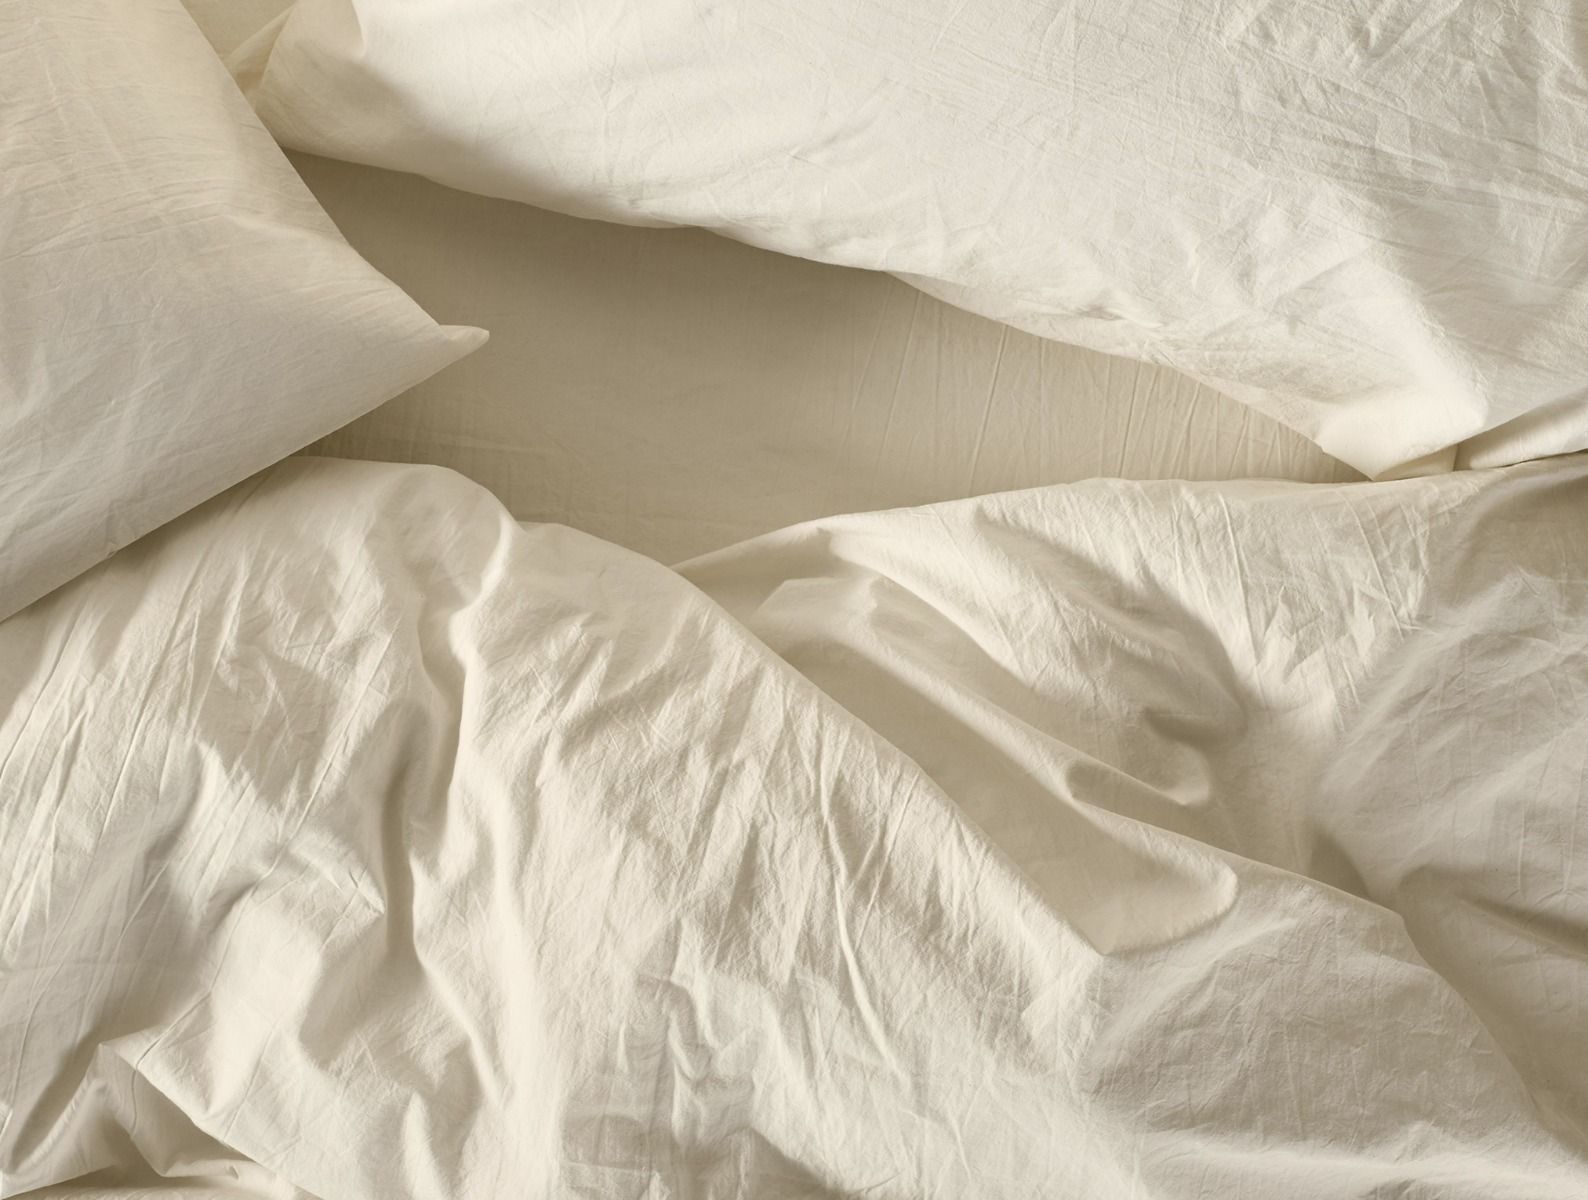 Undyed Ivory Organic Crinkled Sheet Sets - Percale Sheets by Coyuchi Fig Linens